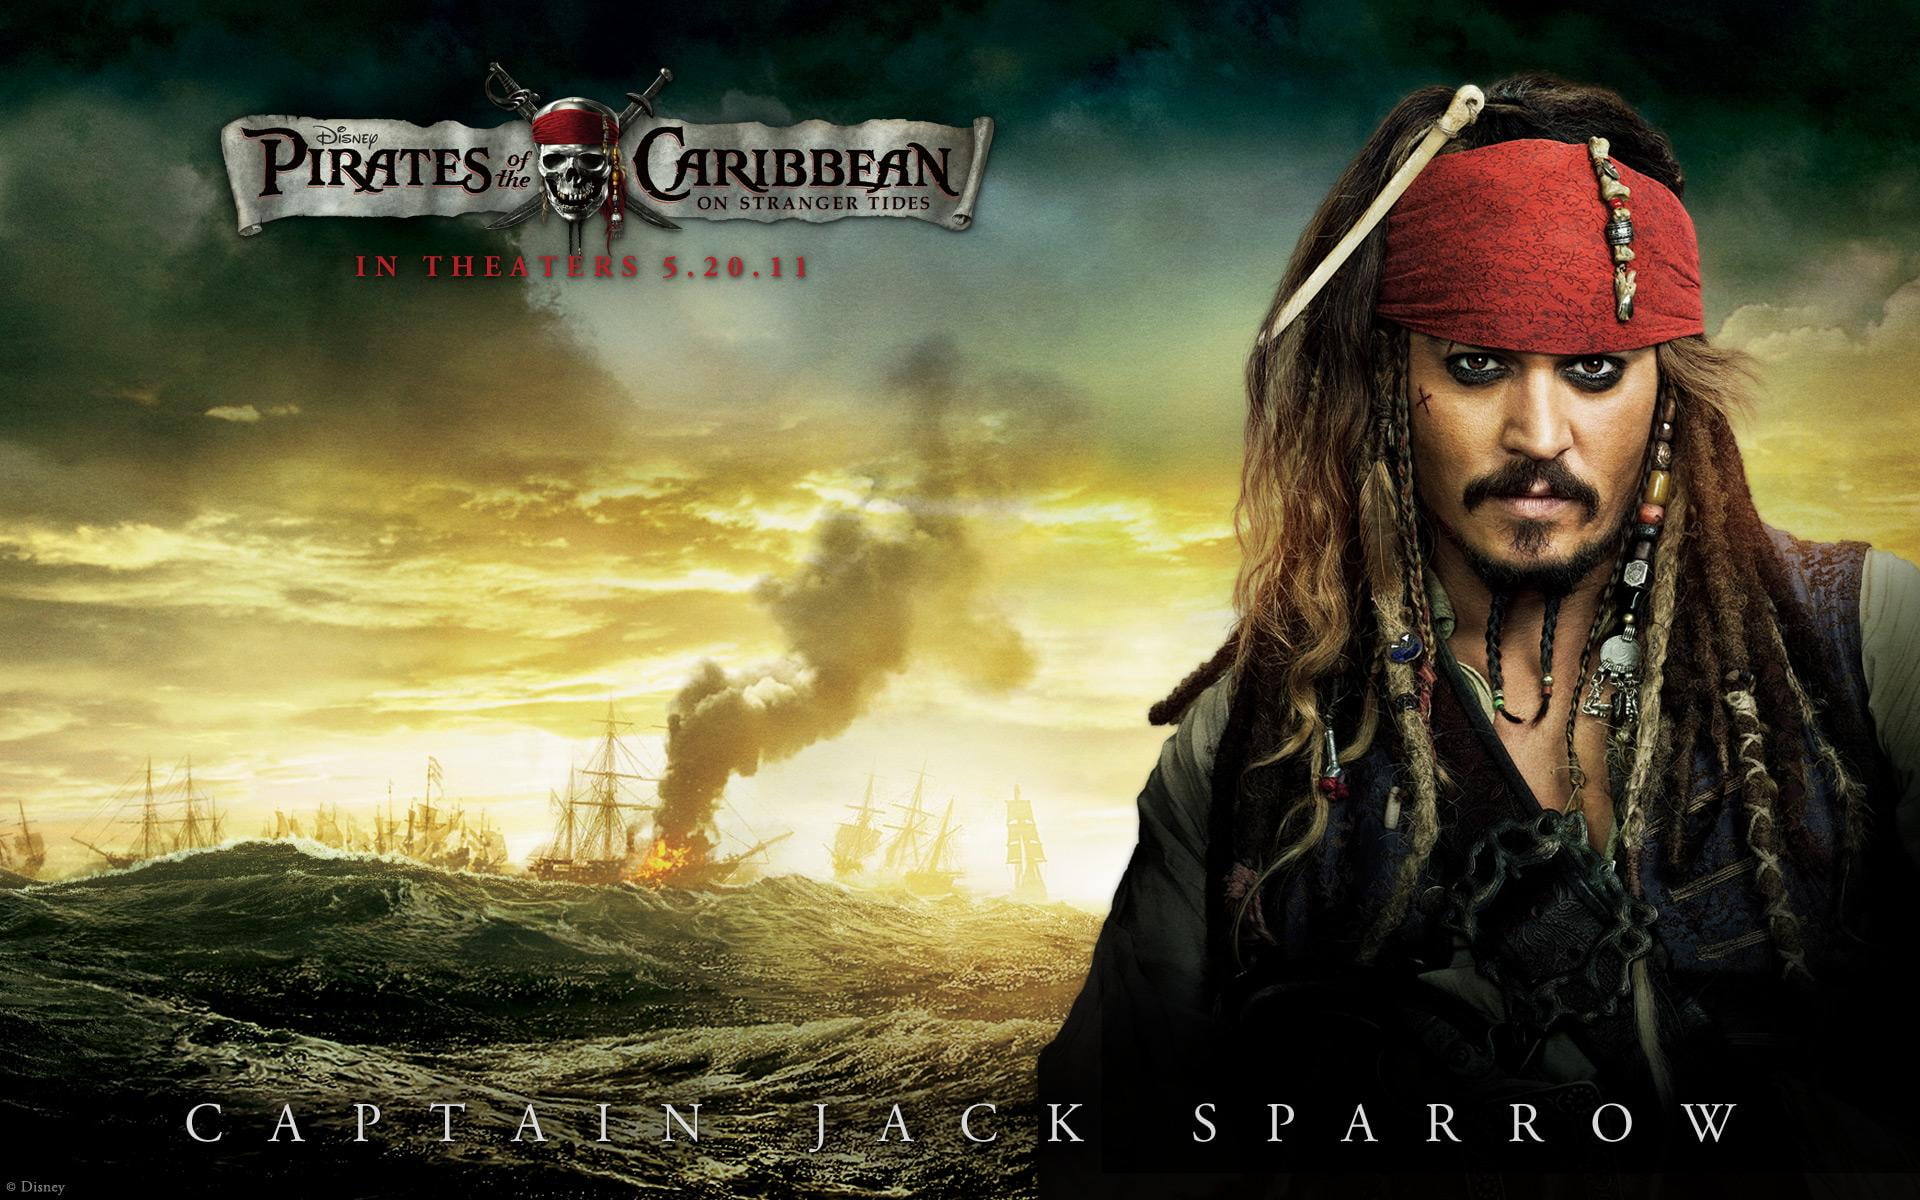 Johnny Depp in Pirates Of The Caribbean 4, pirates of the caribbean movie poster